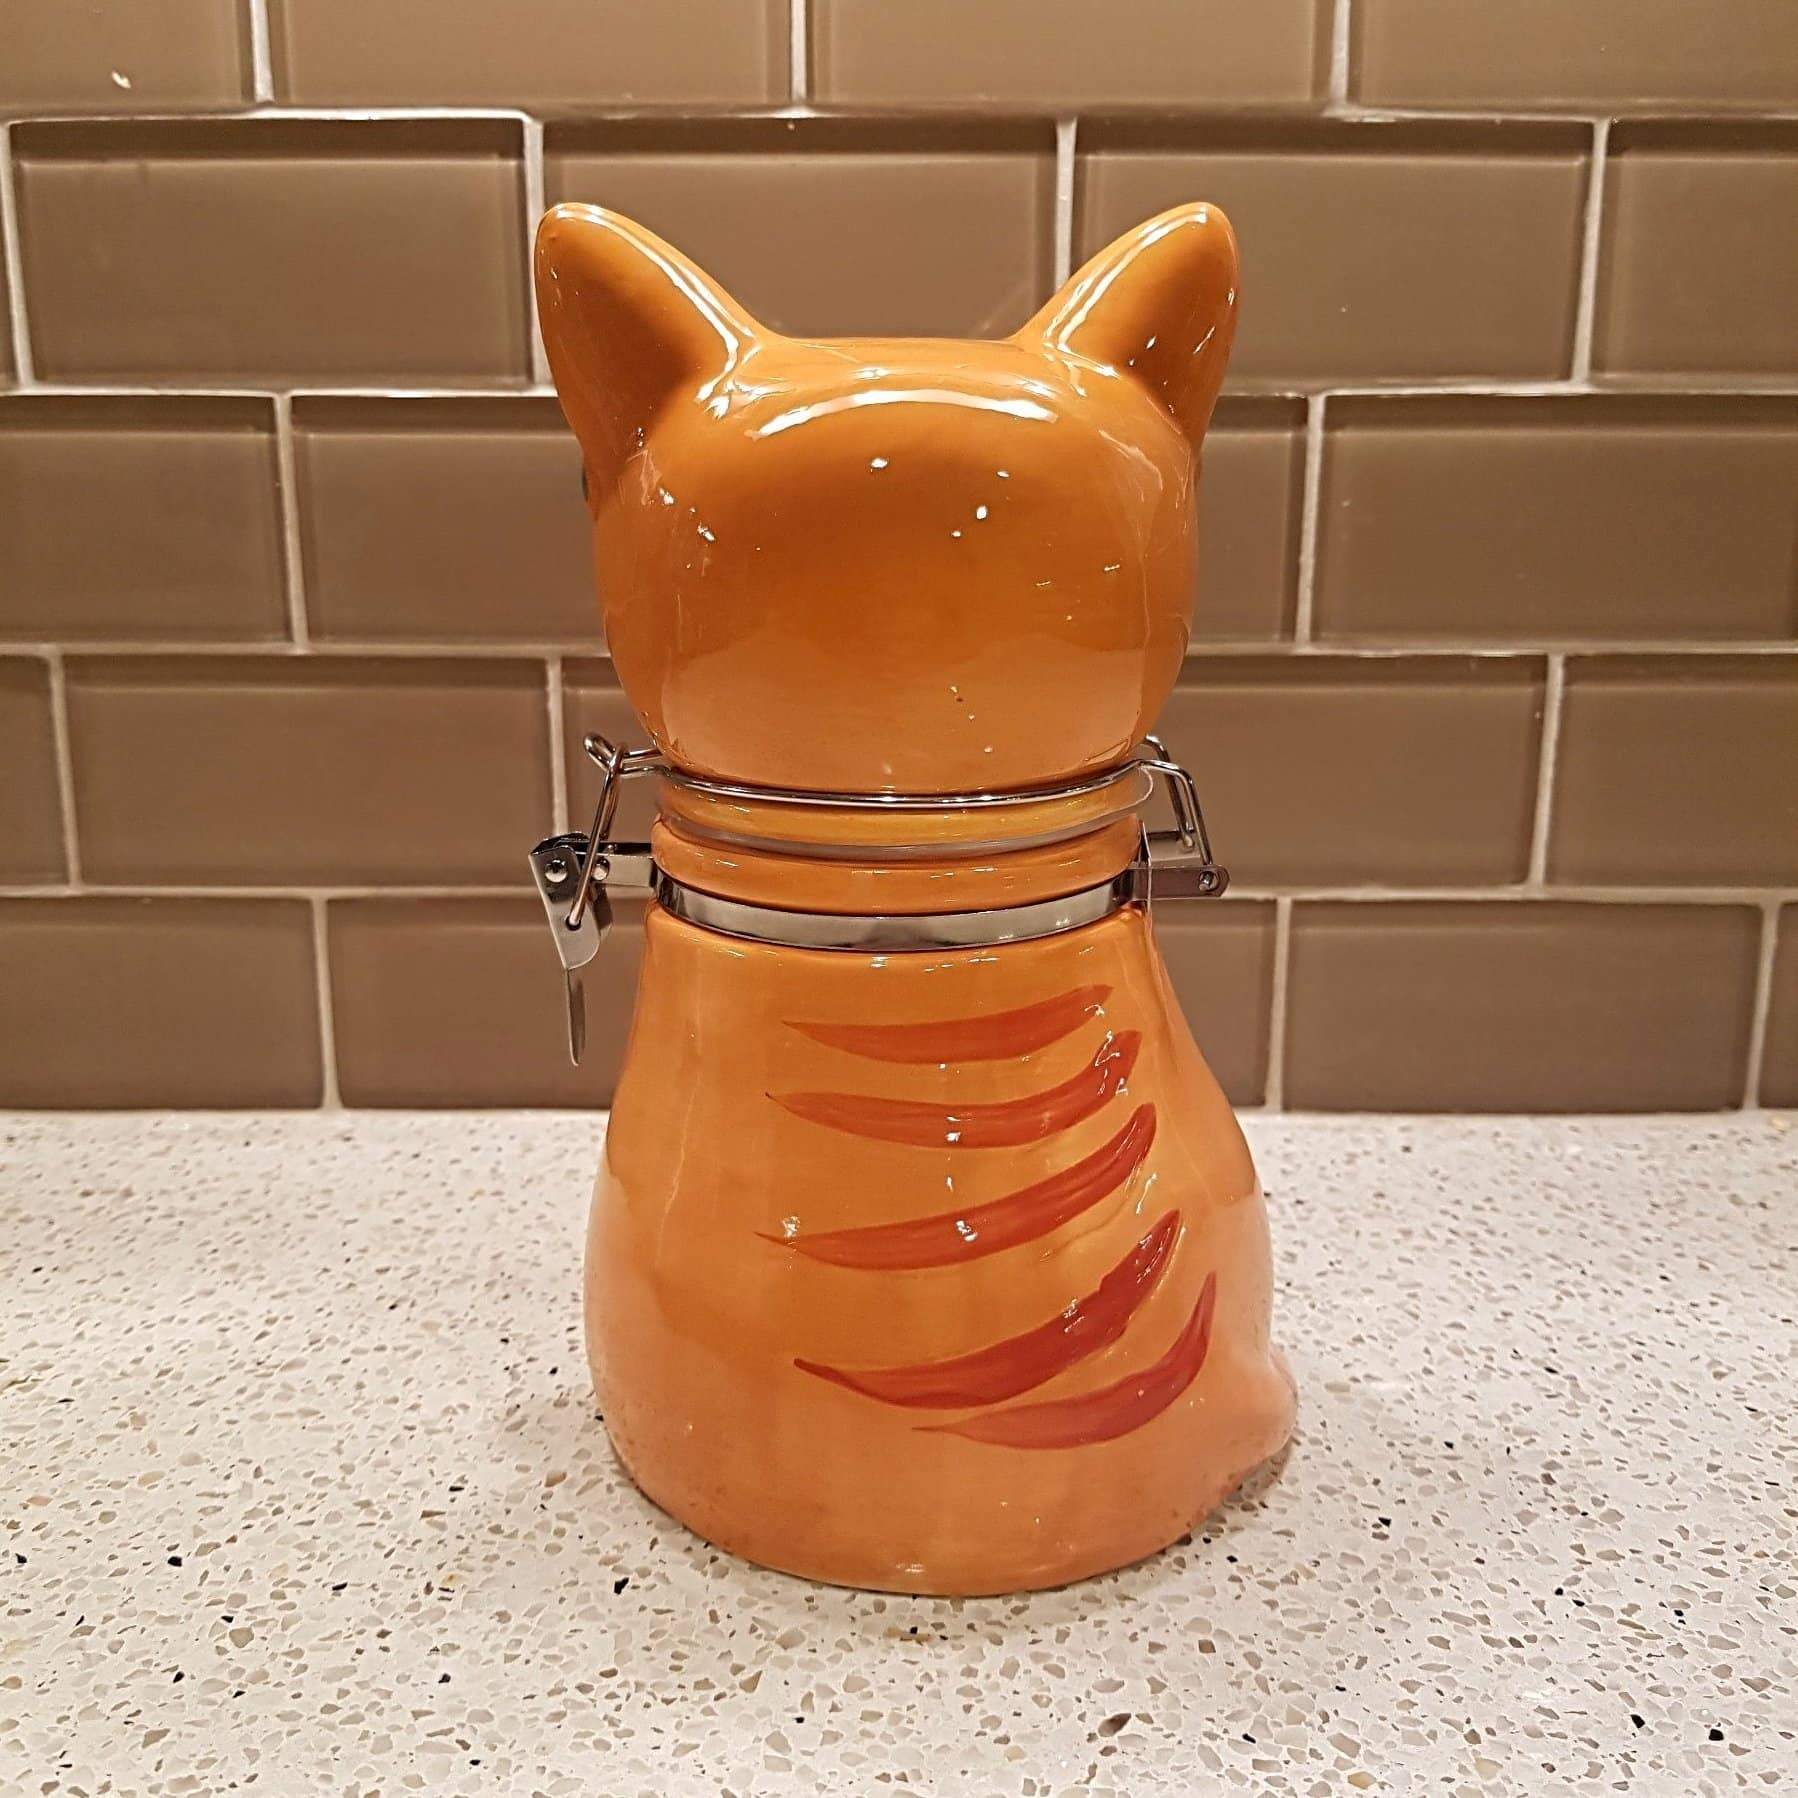 Cute Gifts for Cat Lovers, Ceramic Cat Shaped Jar for Cat Treats